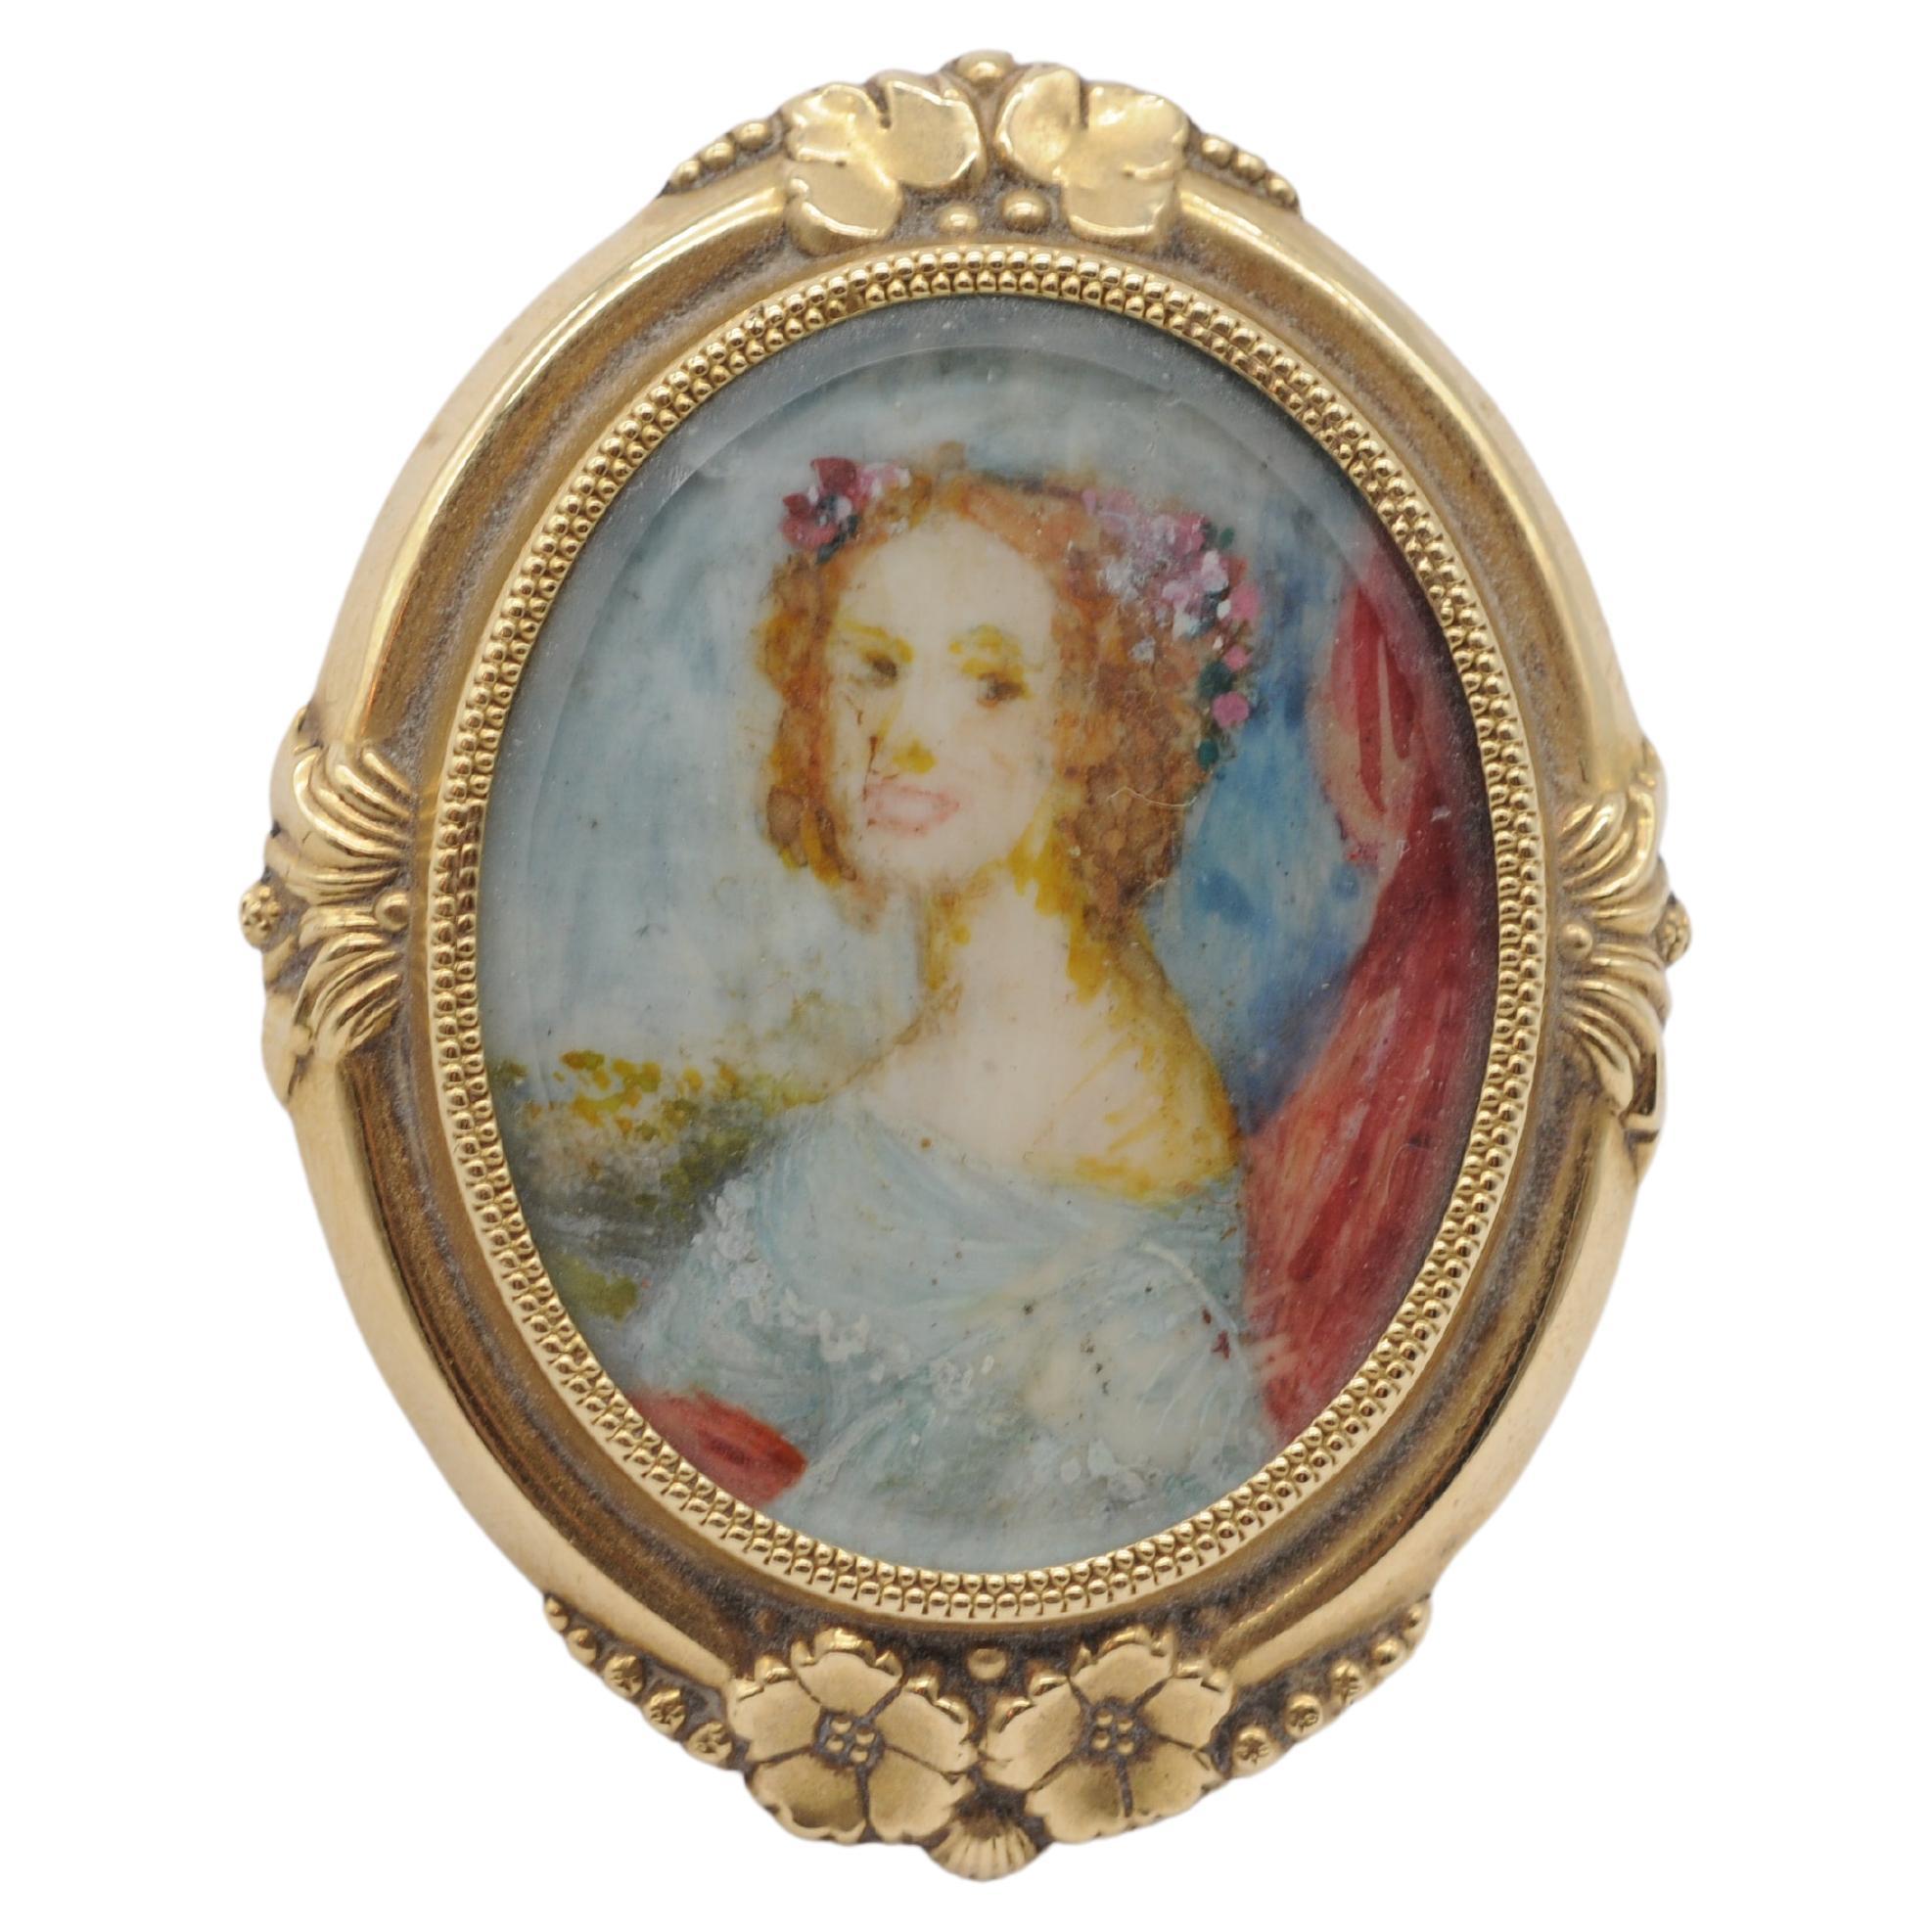 Step into the enchanting world of the Biedermeier era with this exquisite brooch dating back to 1840-1860. Adorned with the delicate depiction of a young and beautiful woman, this brooch is a true testament to the artistic craftsmanship of its